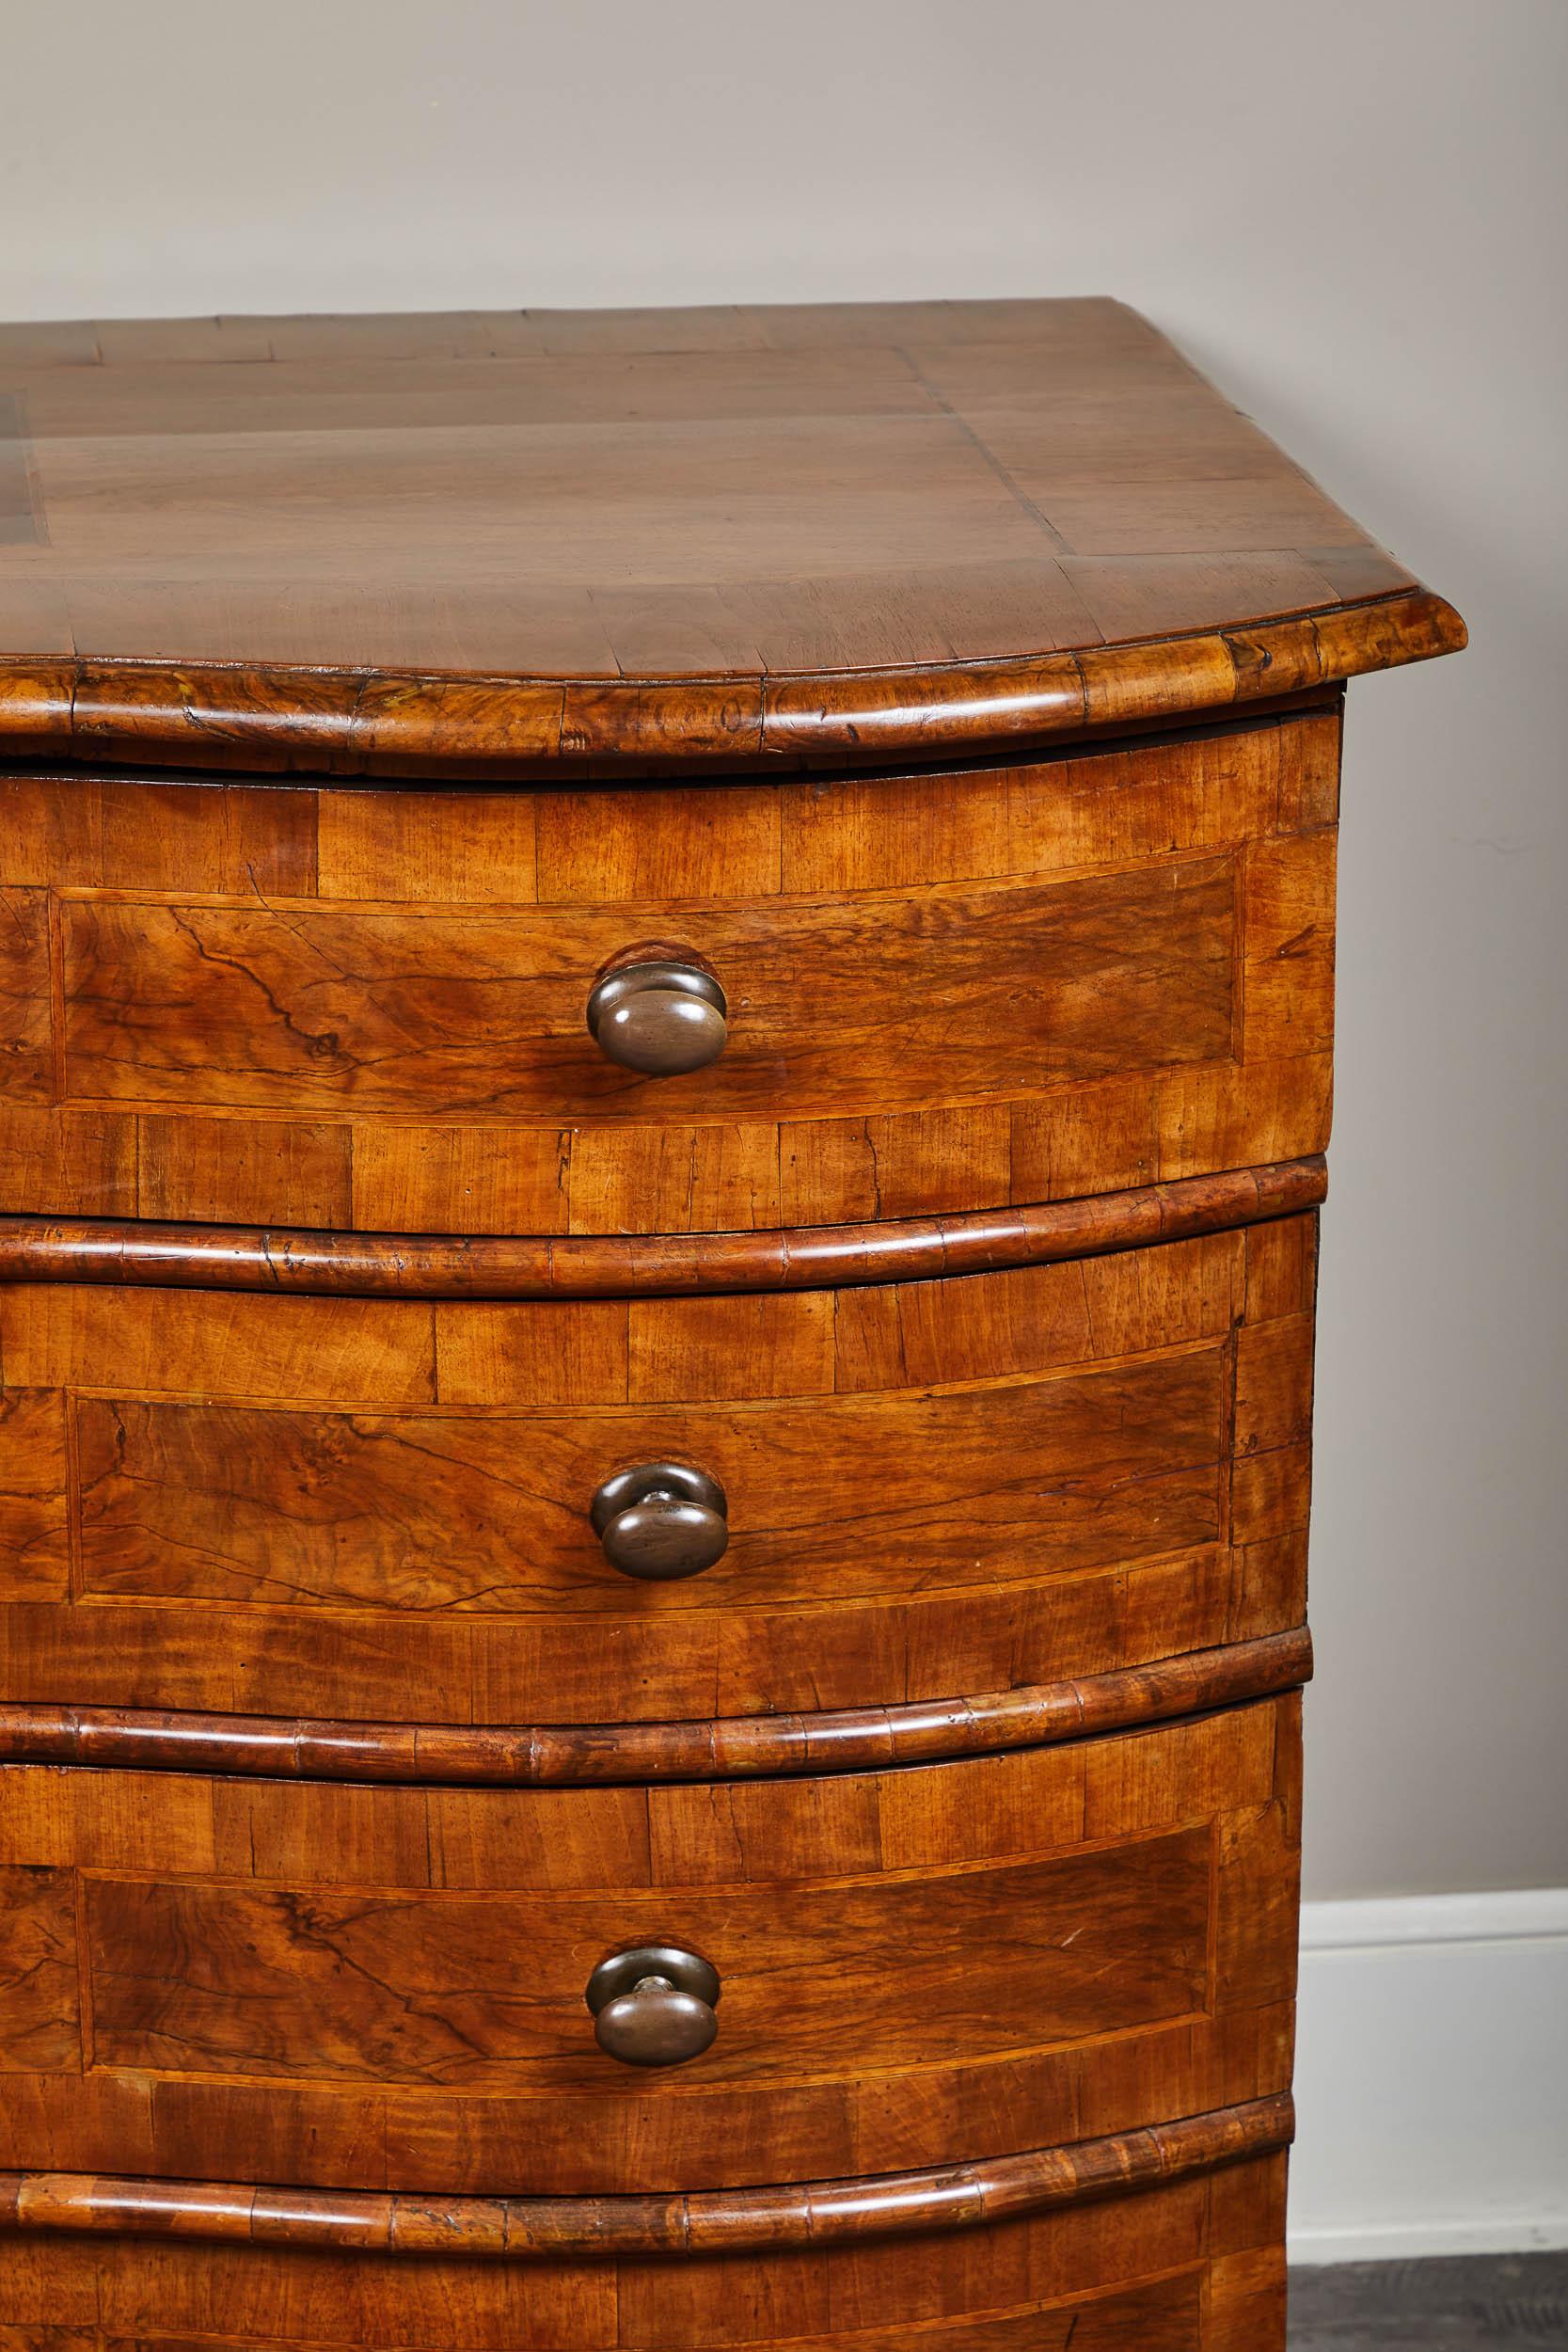 An 18th century English walnut four-drawer chest with a serpentine front. Features an inlaid top and a simple, timeless shape. Great as entry casepiece, or functional bedroom storage.